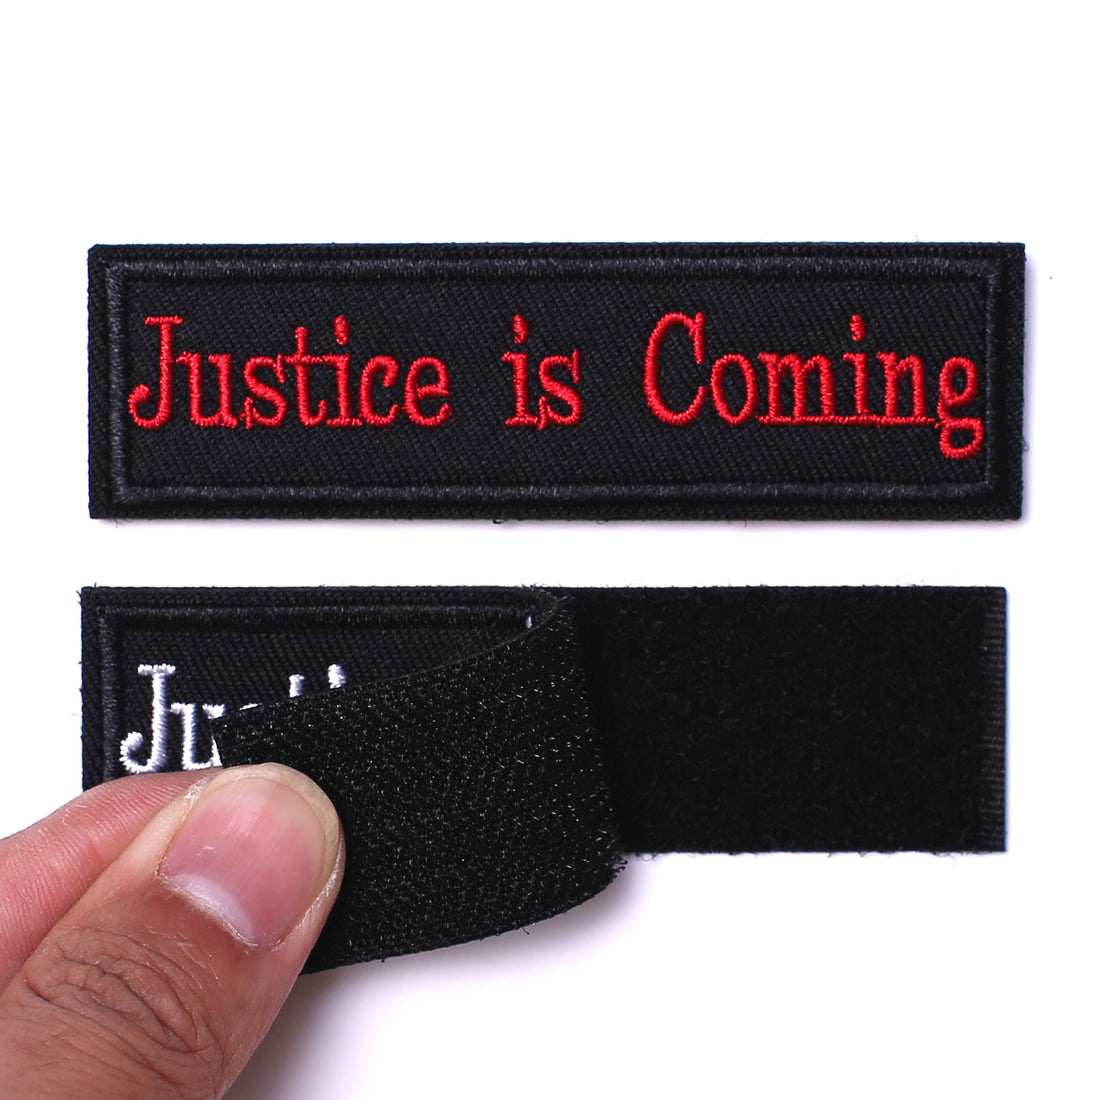 2 Pieces Justice is coming Tactical Patch